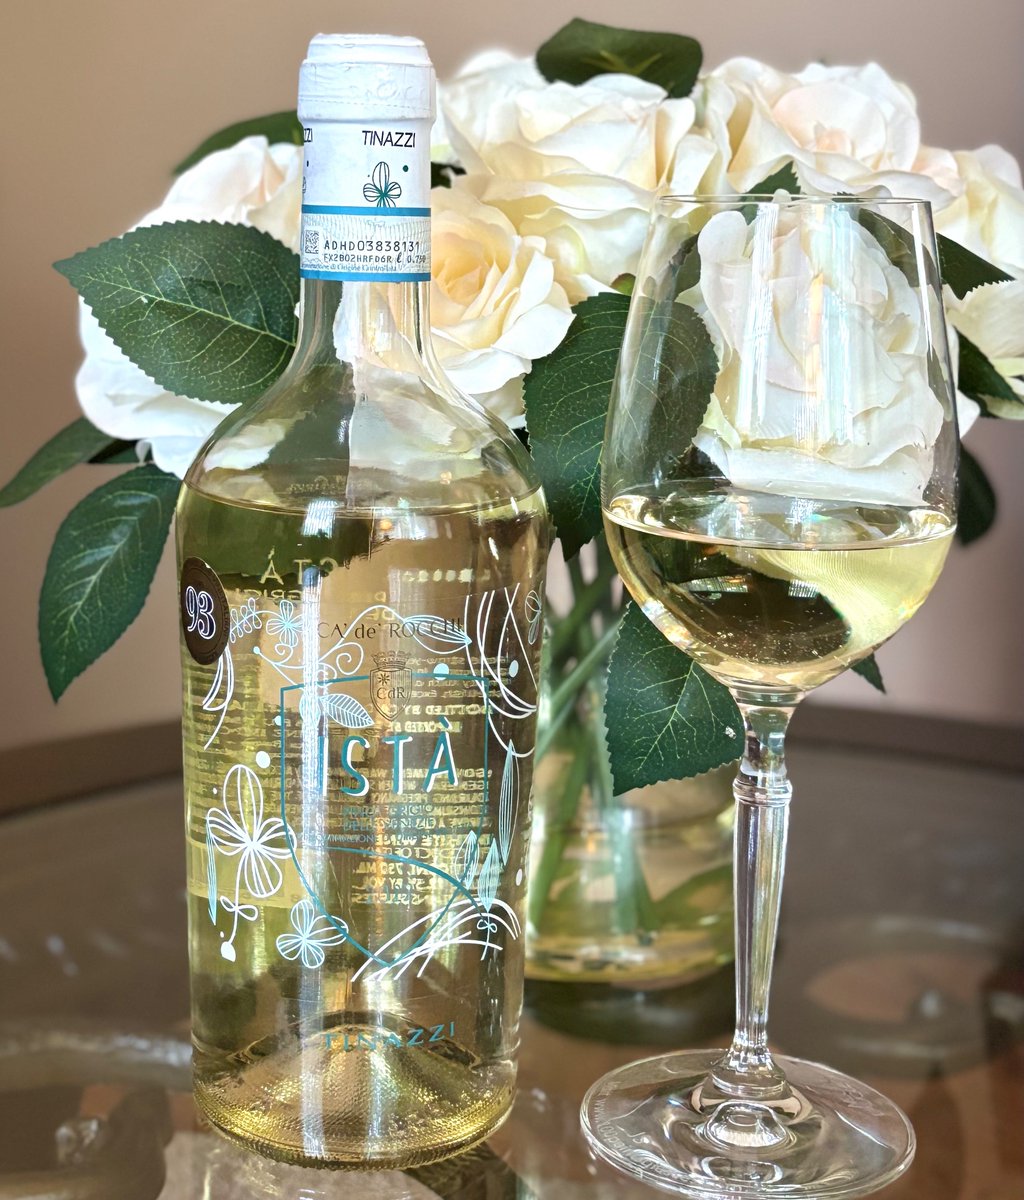 A5. For tonight’s chat, I did open a bottle of @CantineTinazzi Ca’ de Rocchi Ist Pinot Grigio delle Venezie. What a beauty! Intense aromas of pineapple and green apple. The palate is fresh, floral and light with citrus fruit. Crisp, mineral finish. #WiningHourChat